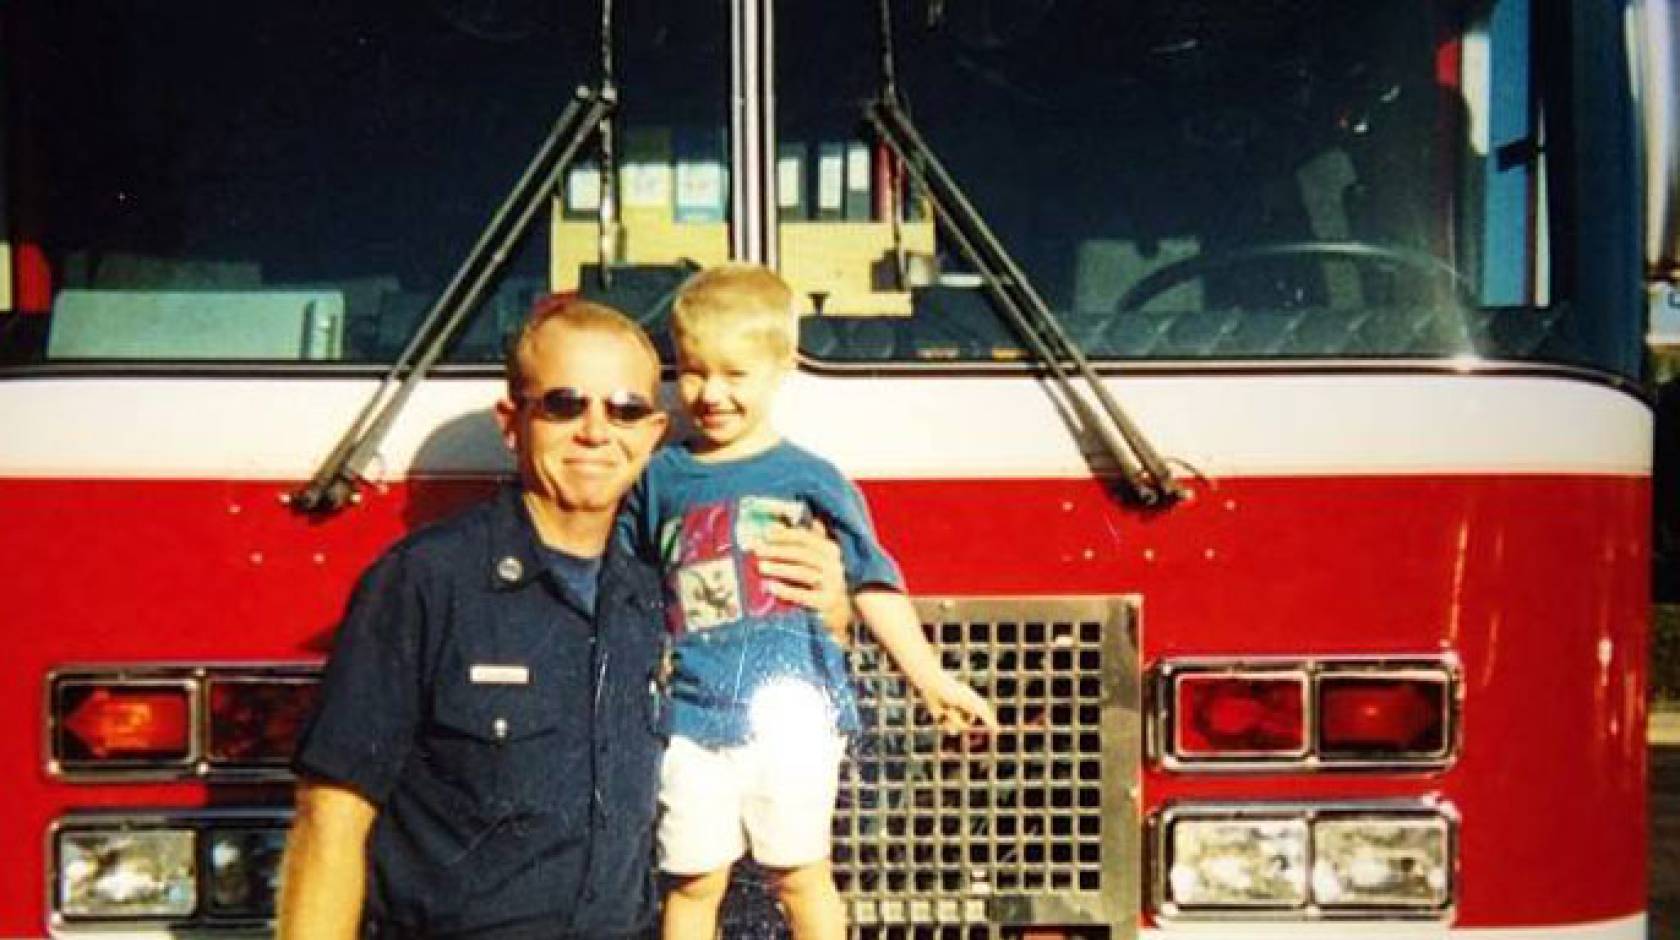 Kelly Richeson in front of fire truck with son